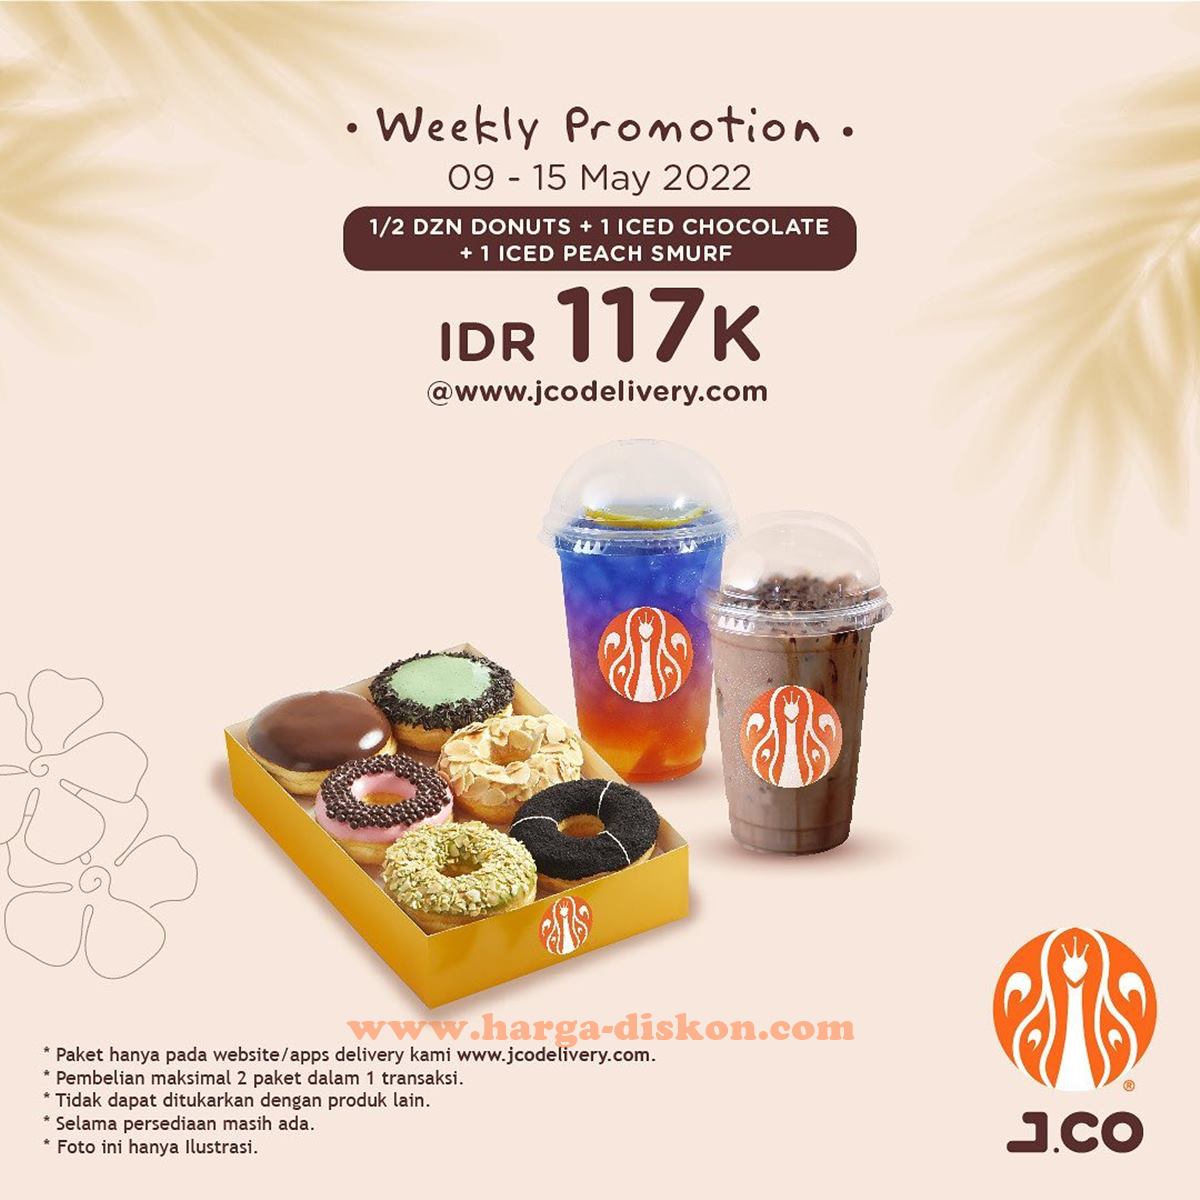 Promo JCO Delivery Weekly Promotion Periode 9 - 15 Mei 2022